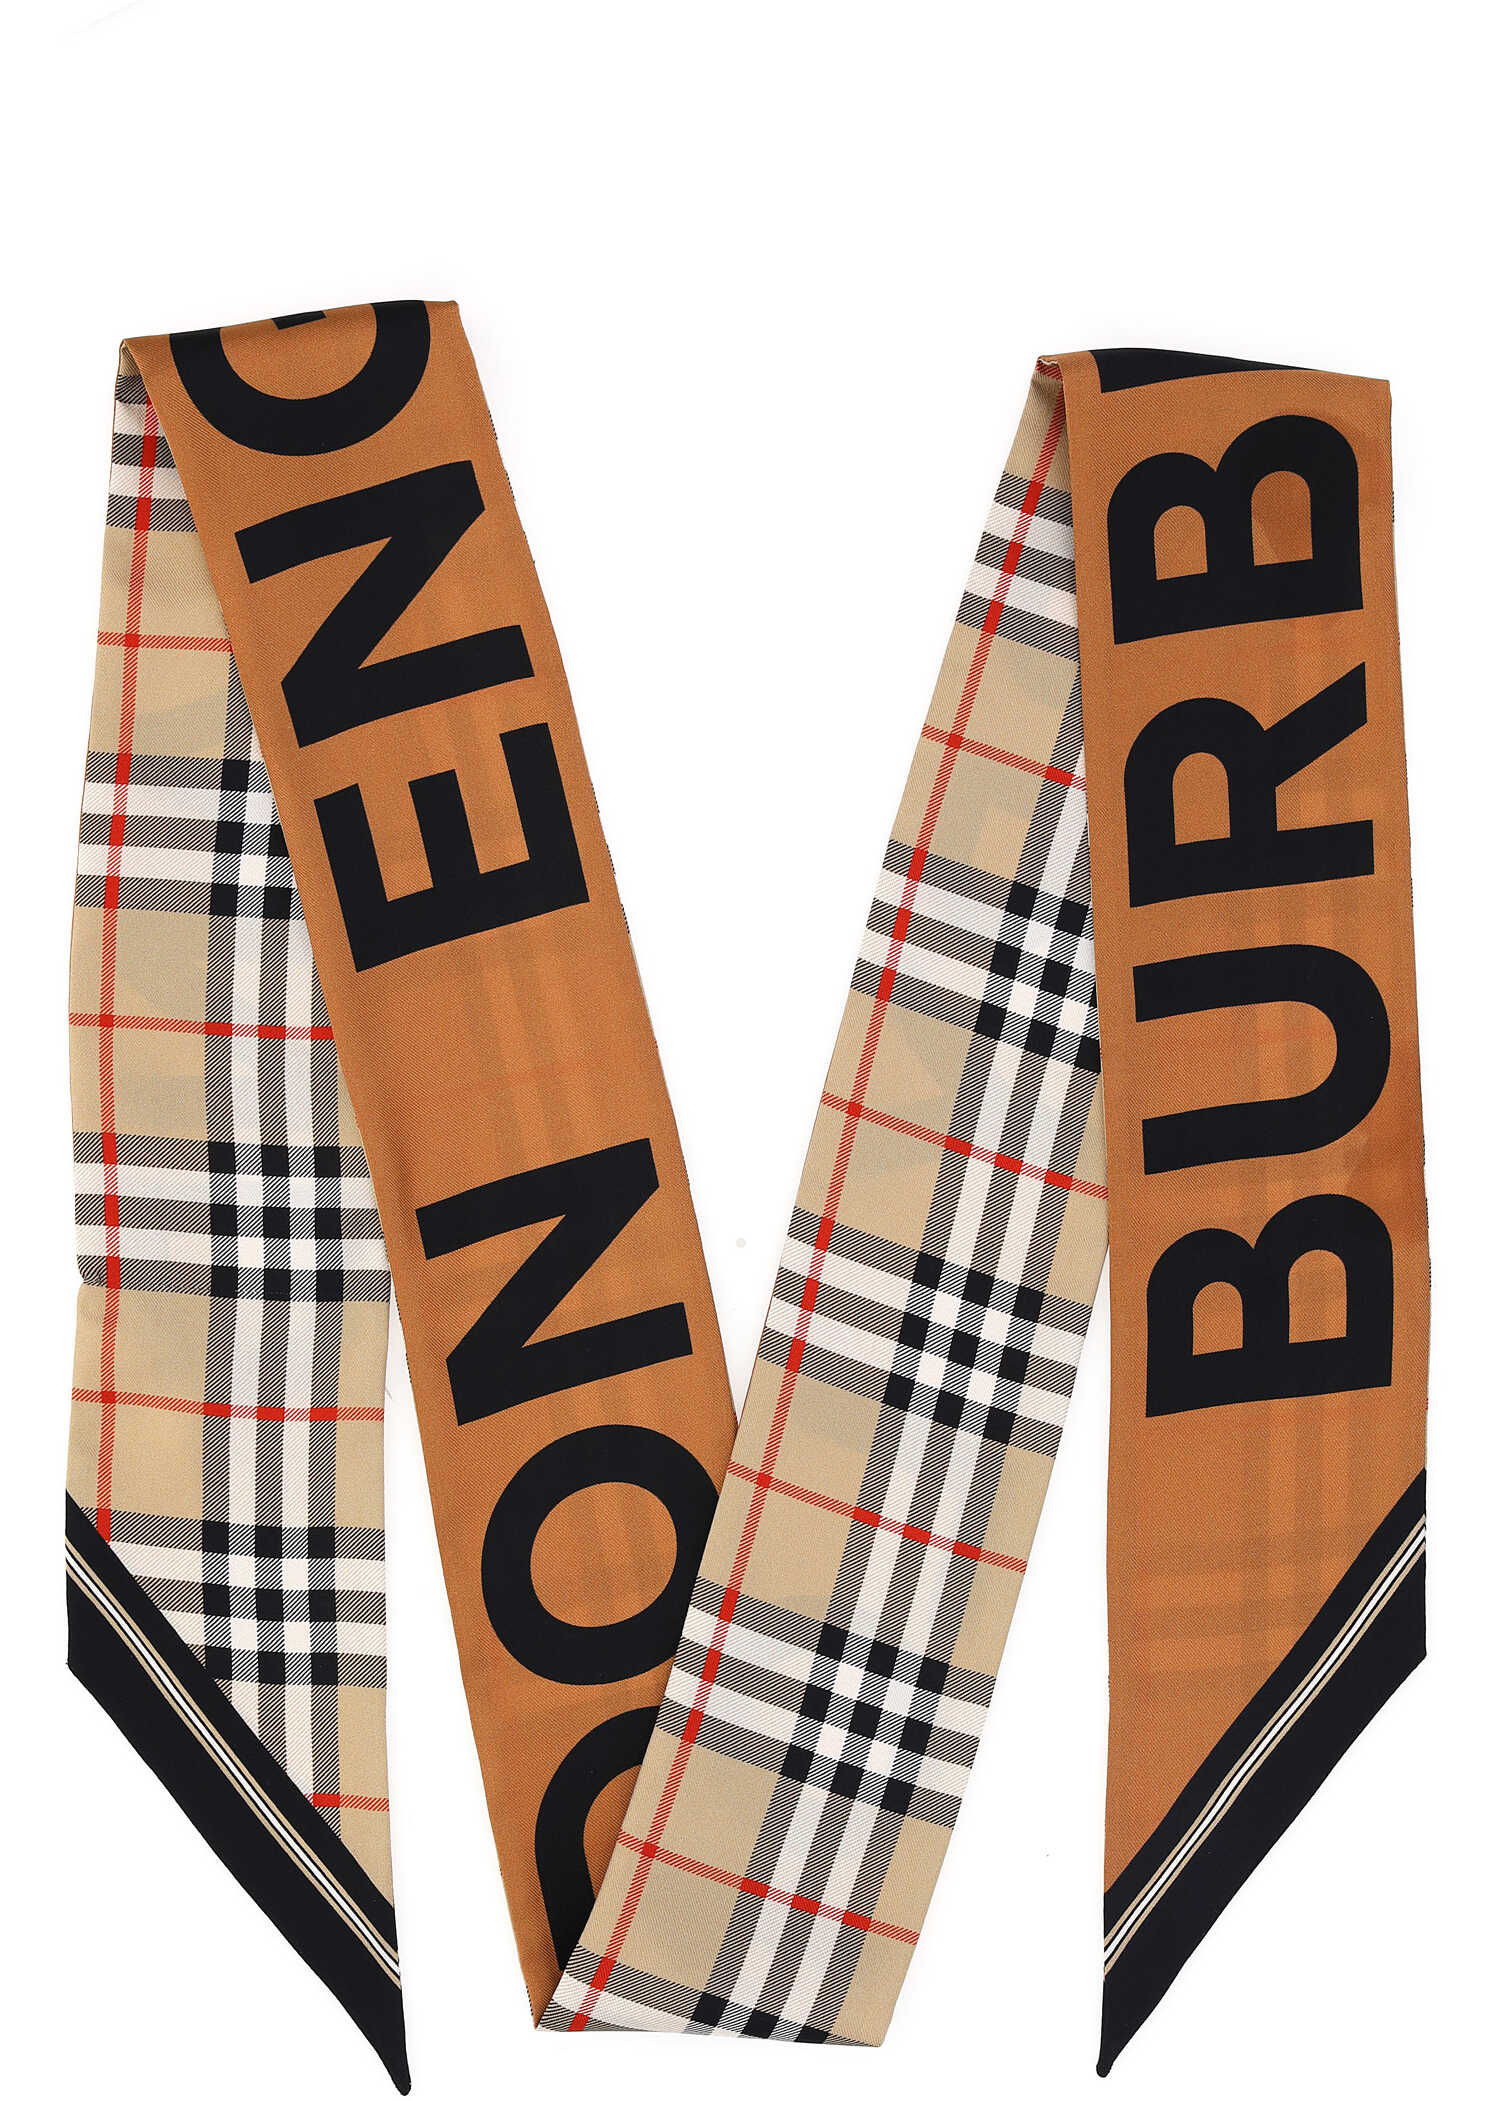 Burberry Skinny Scarf ARCHIVE BEIGE image0